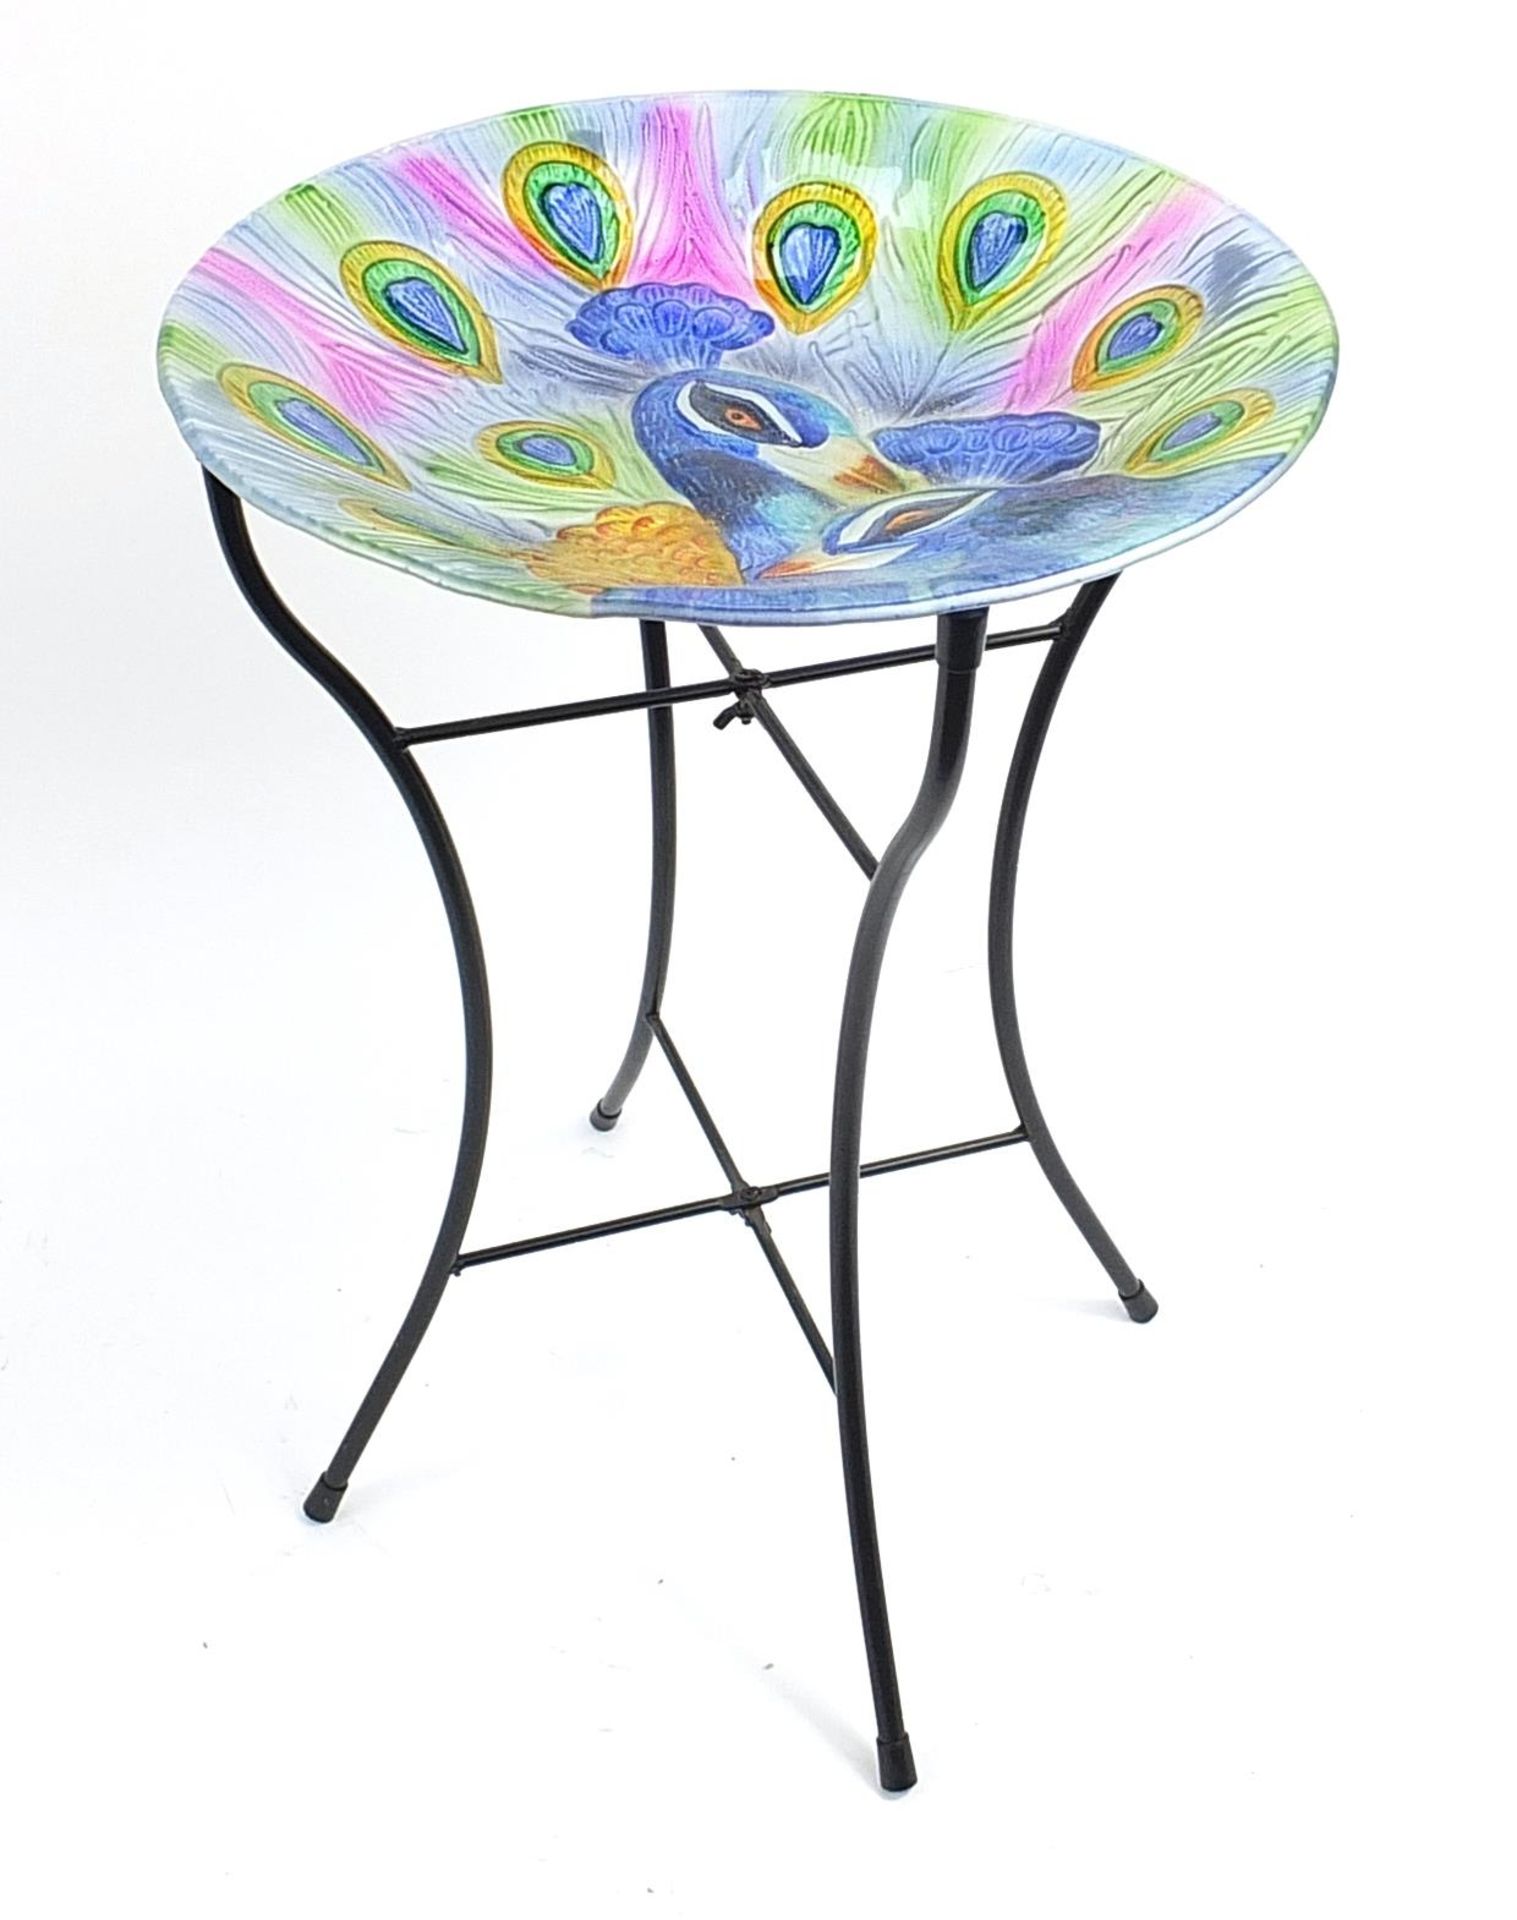 Hand painted glass top peacock table on metal stand, 50cm high x 35cm in diameter